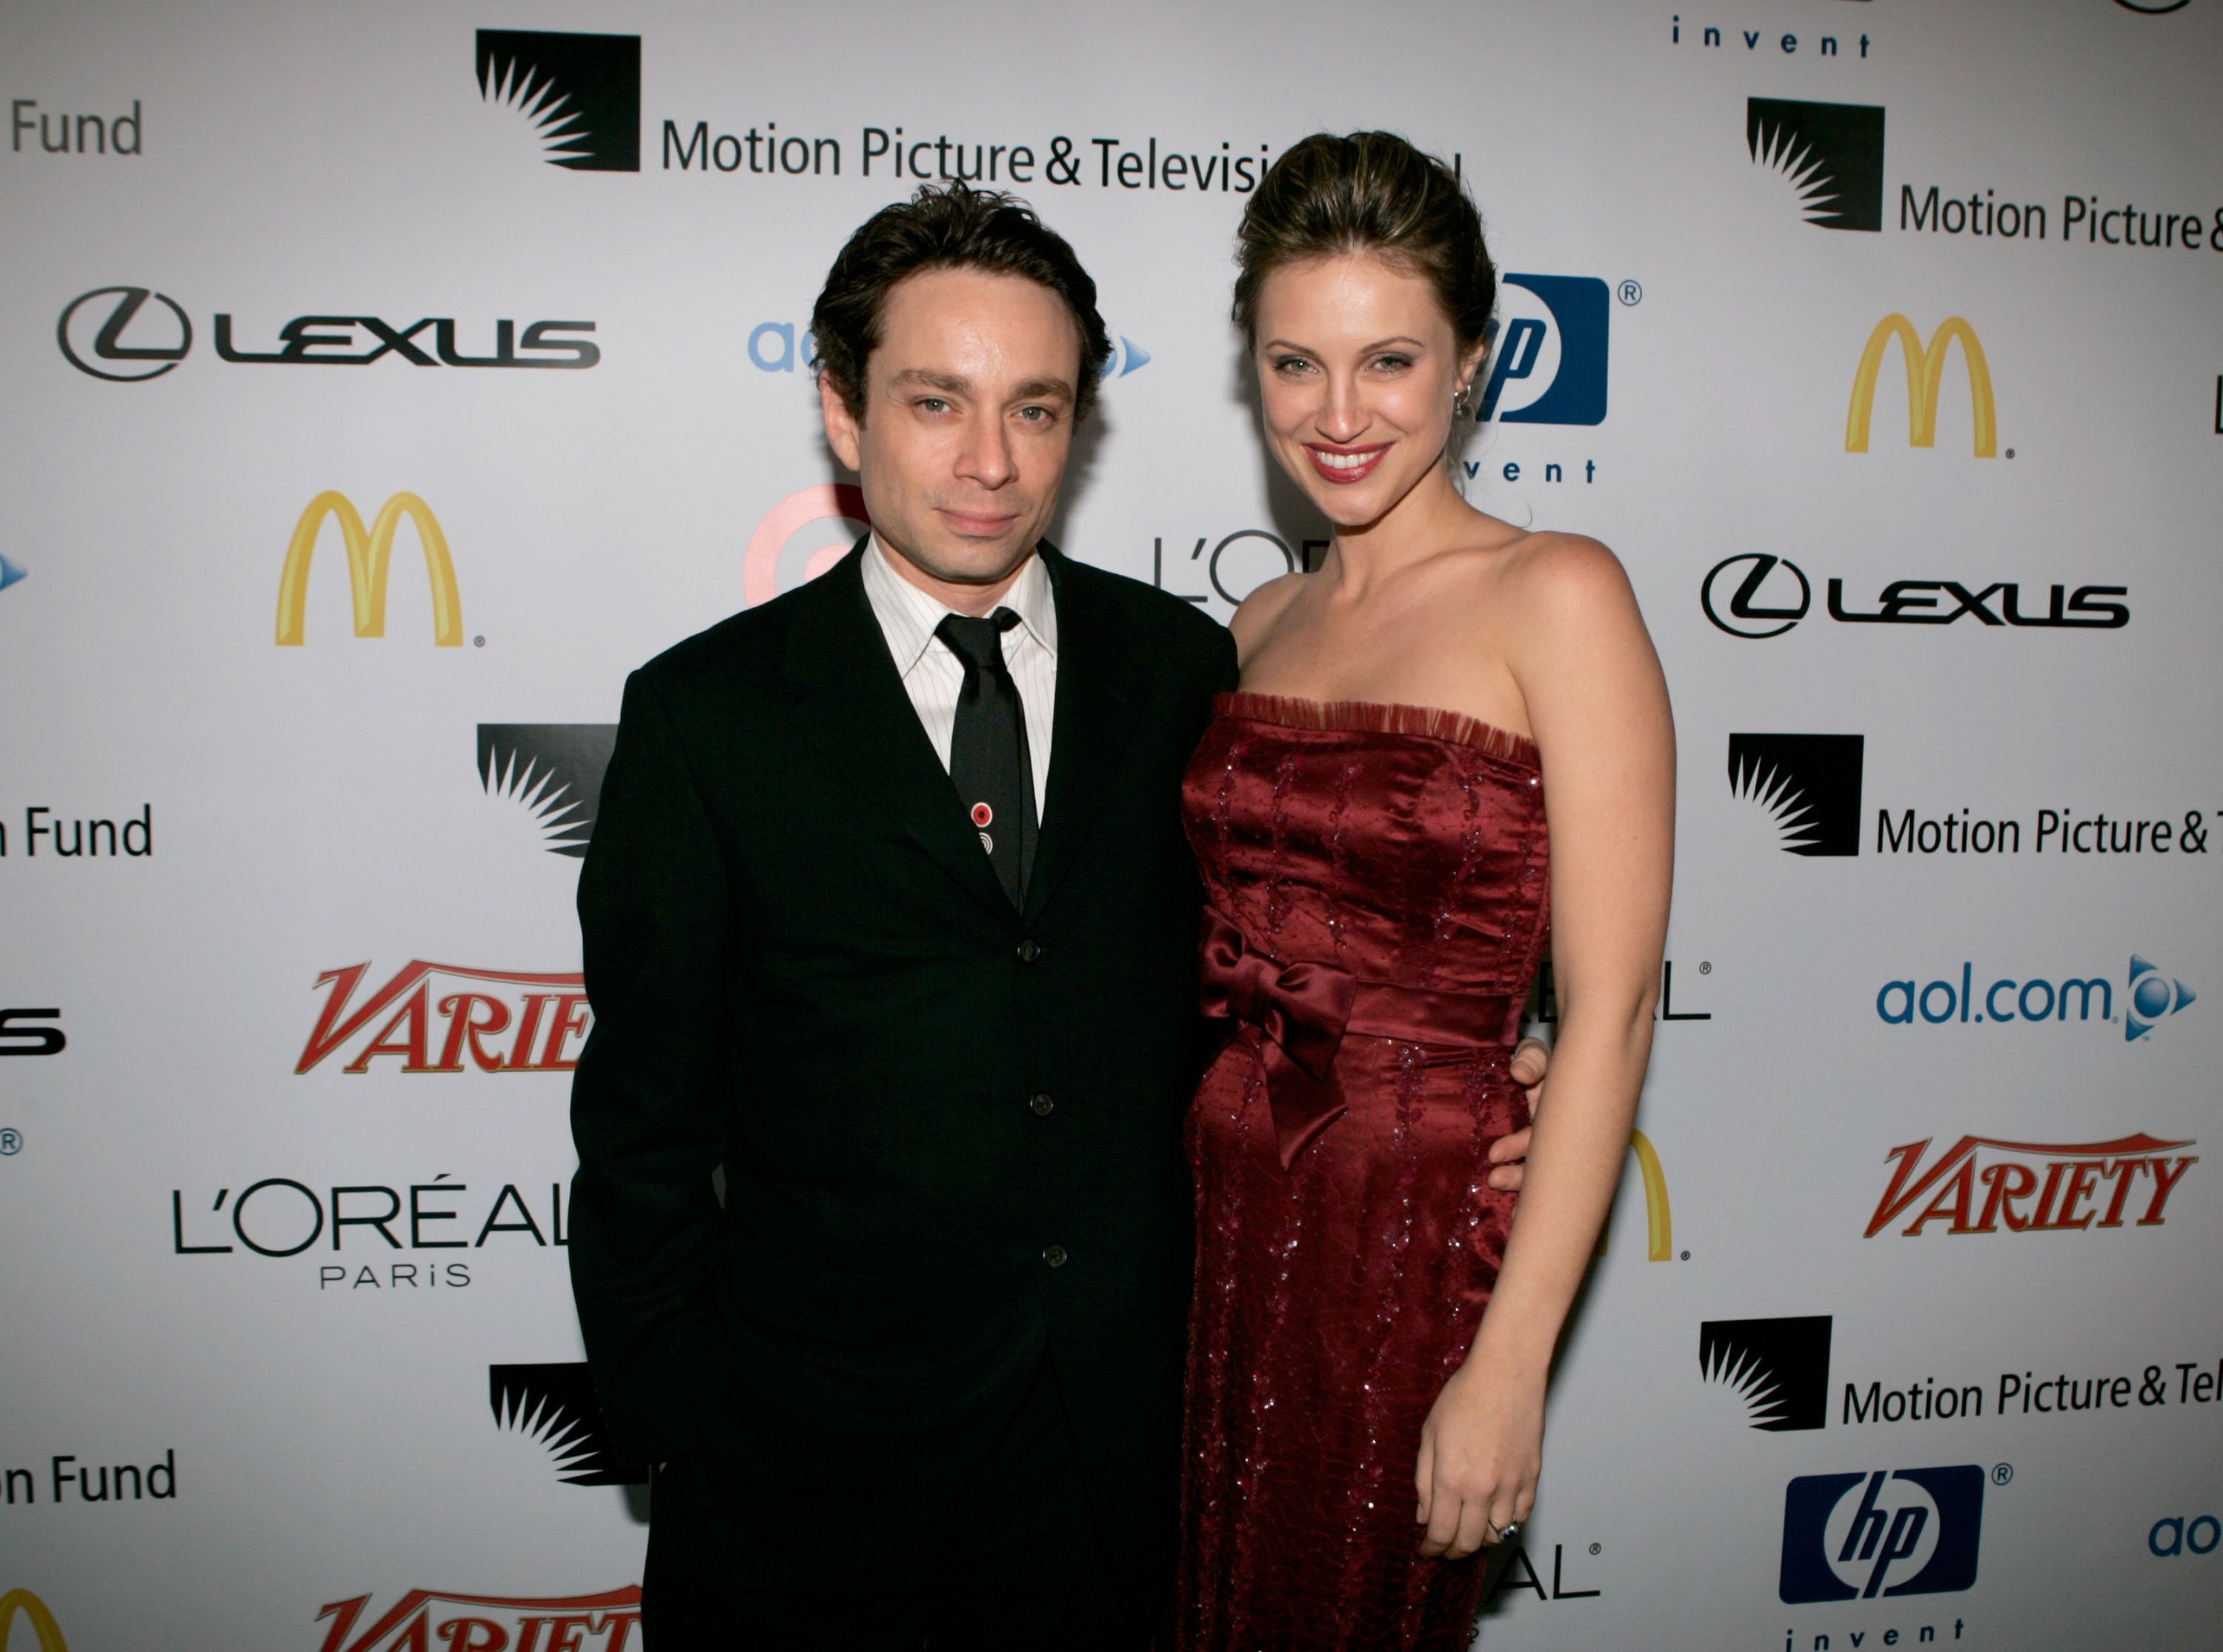 Chris Kattan and Sunshine Deia Tutt attend the 4th Annual "Night Before" party in Beverly Hills Hotel on March 4, 2006, in Beverly Hills, California. | Source: Getty Images